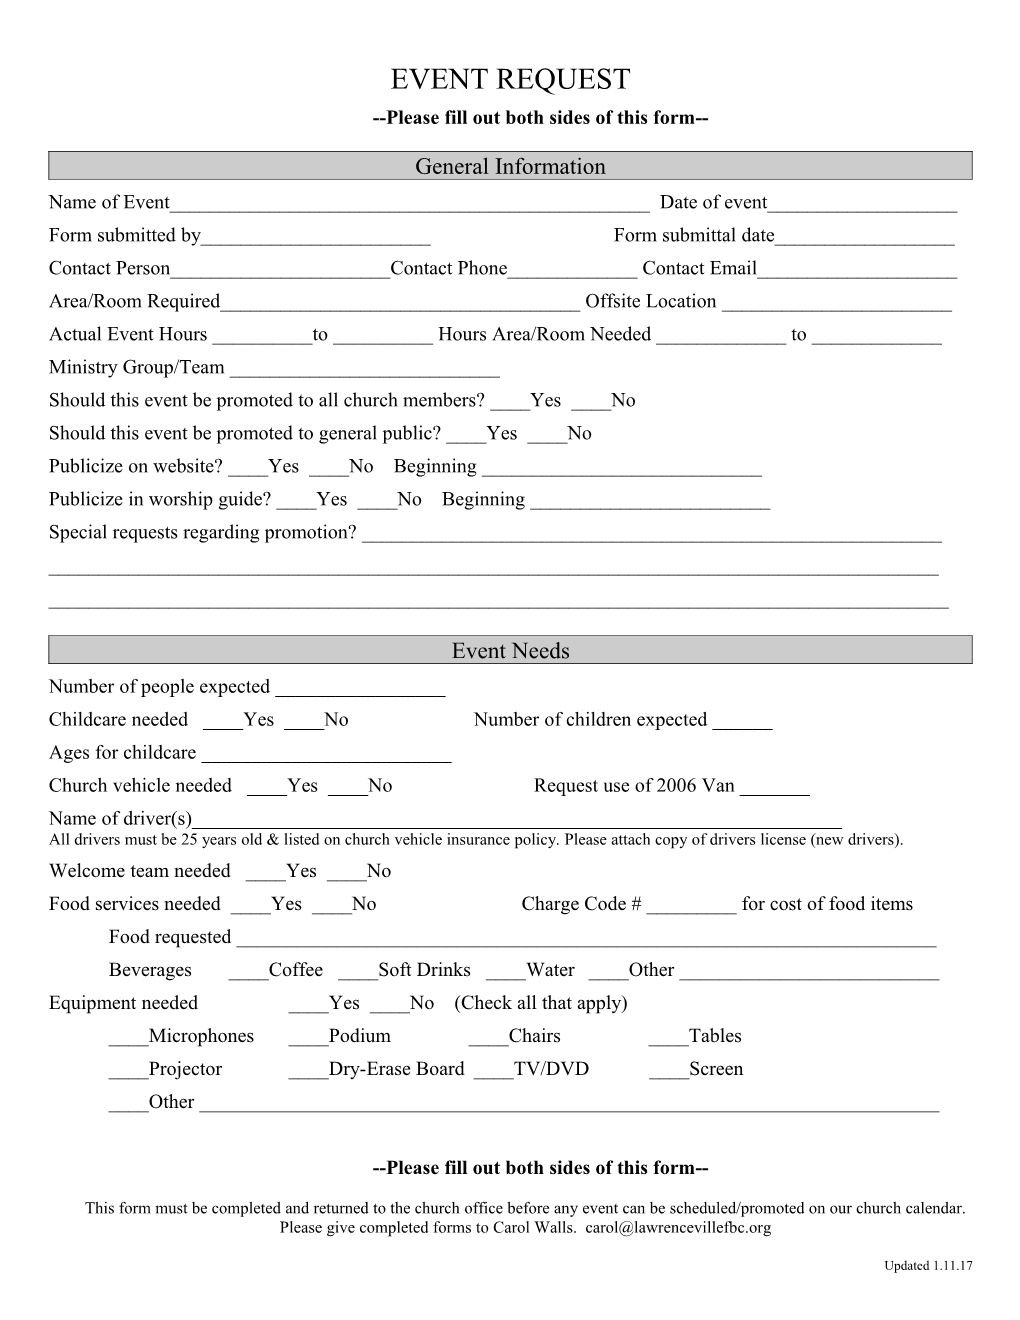 Please Fill out Both Sides of This Form